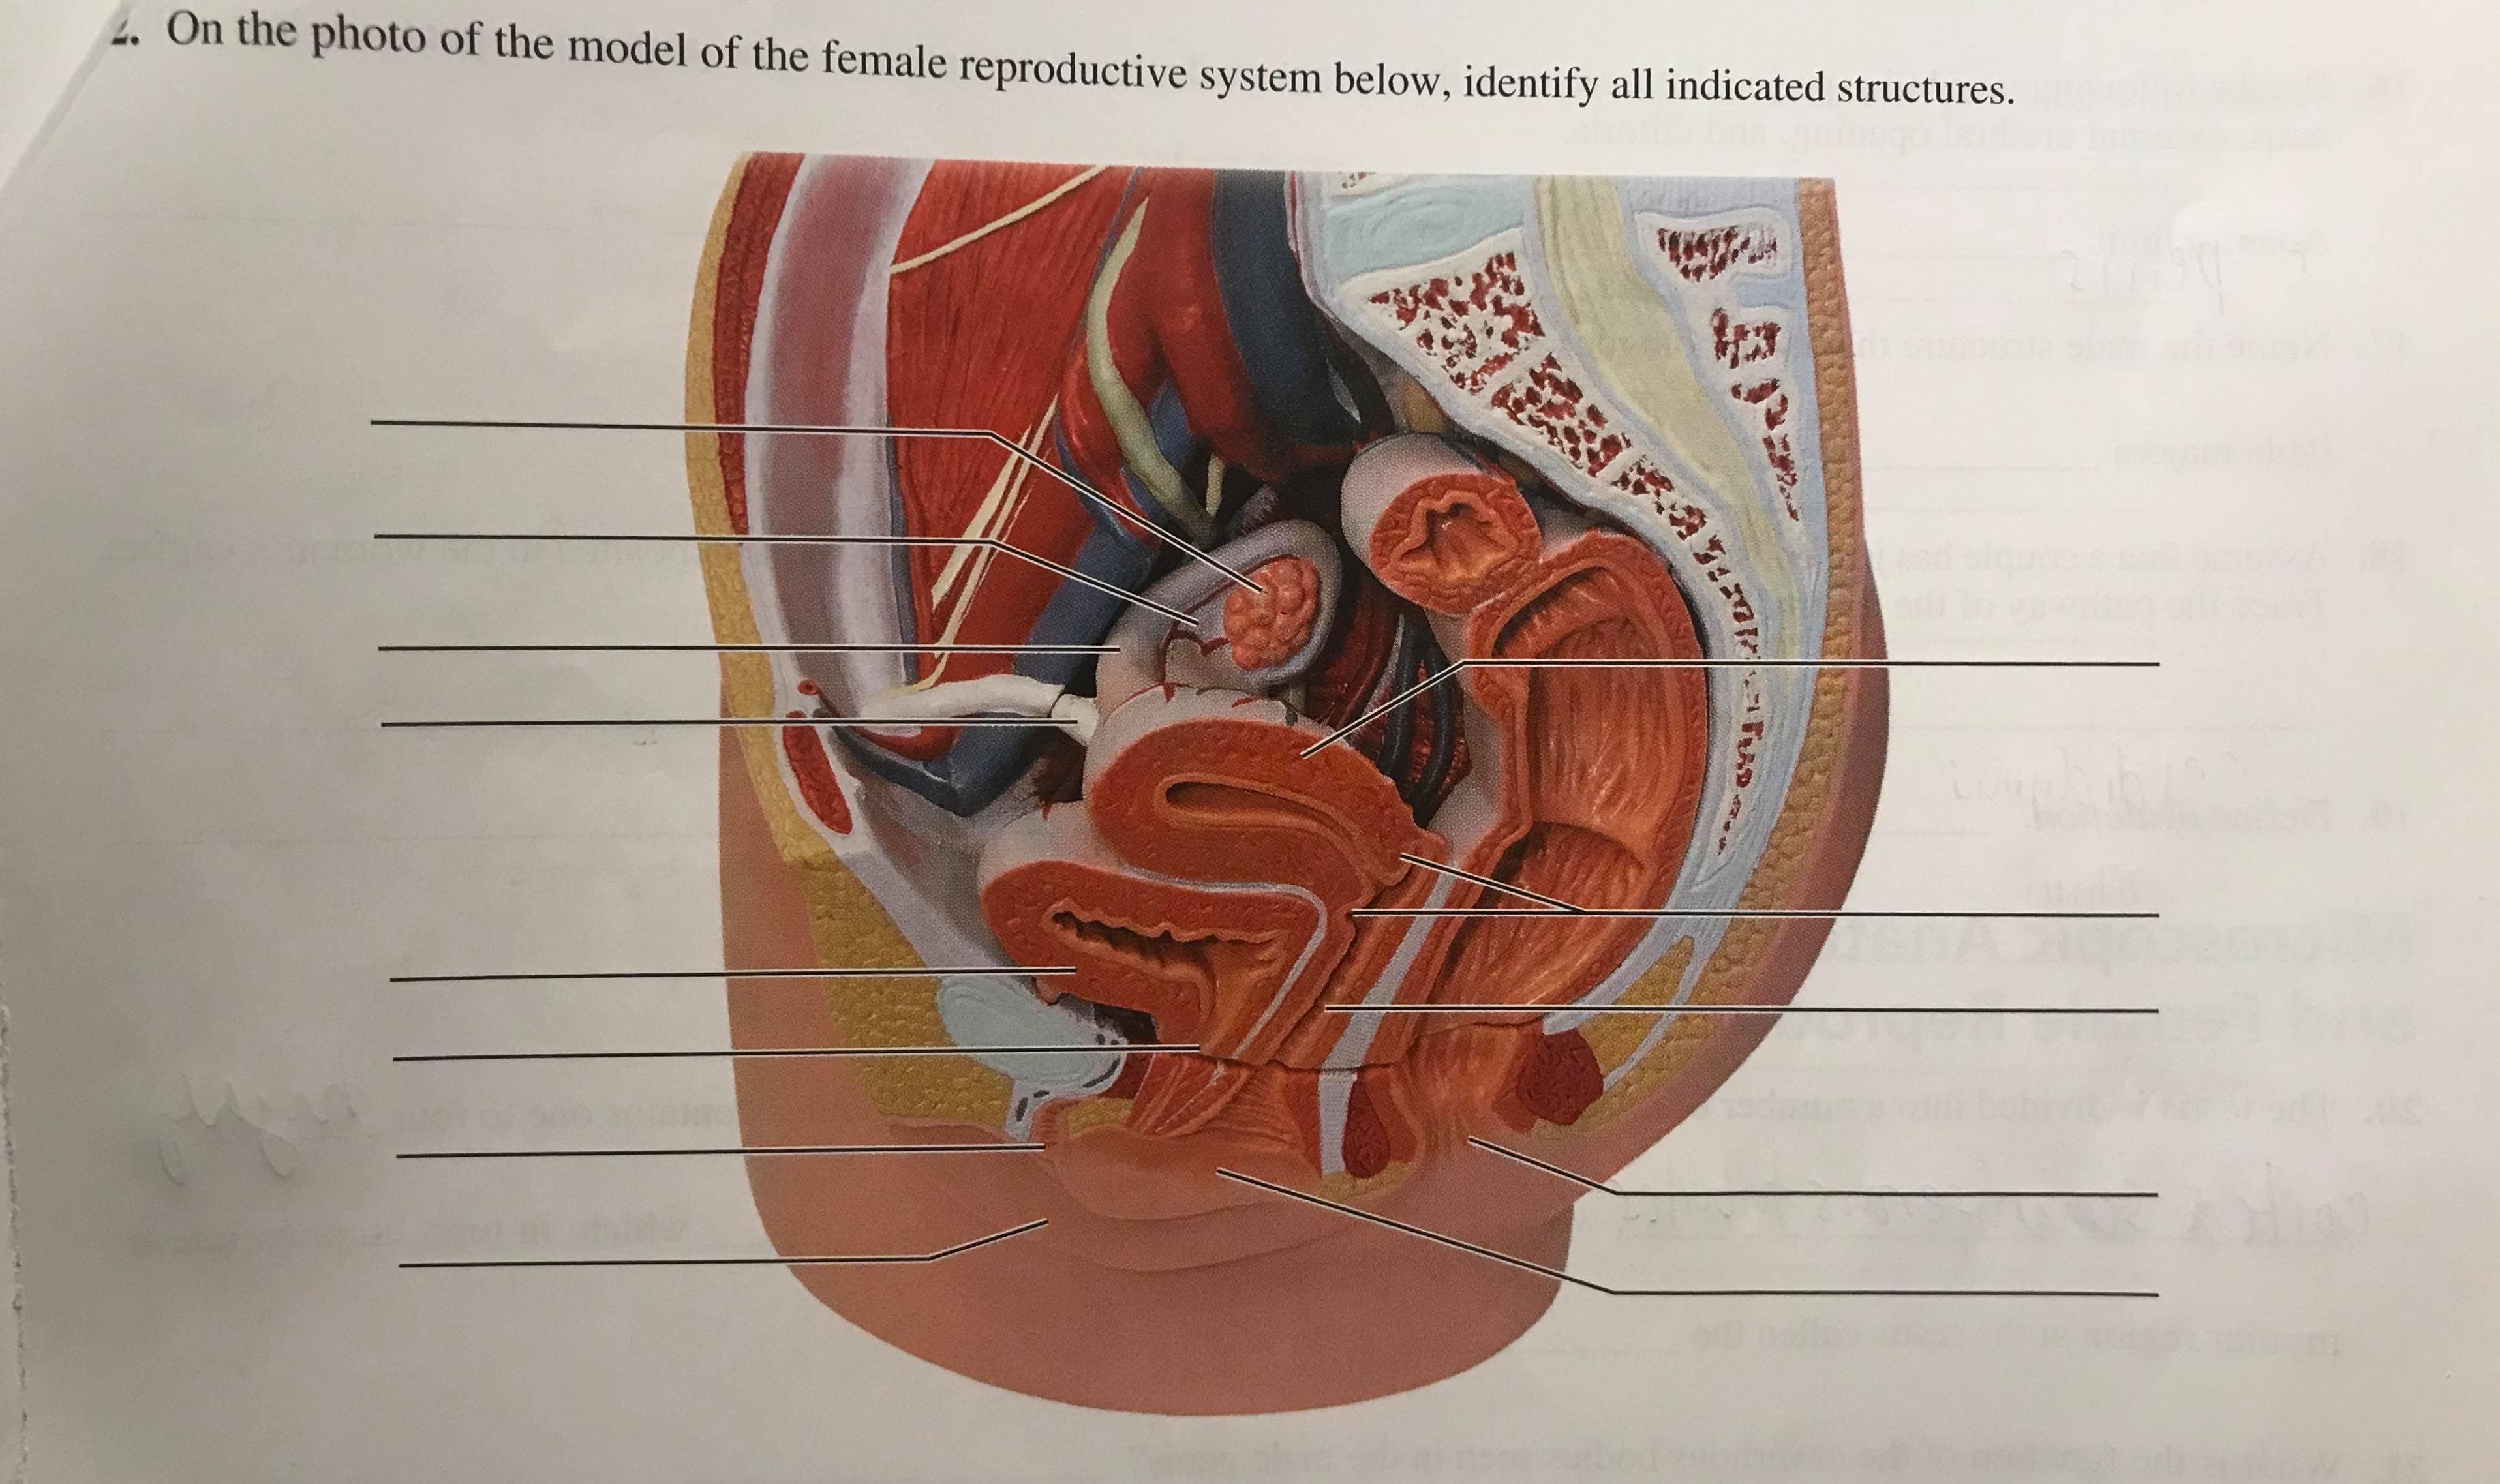 2. On the photo of the model of the female reproductive system below, identify all indicated structures.
